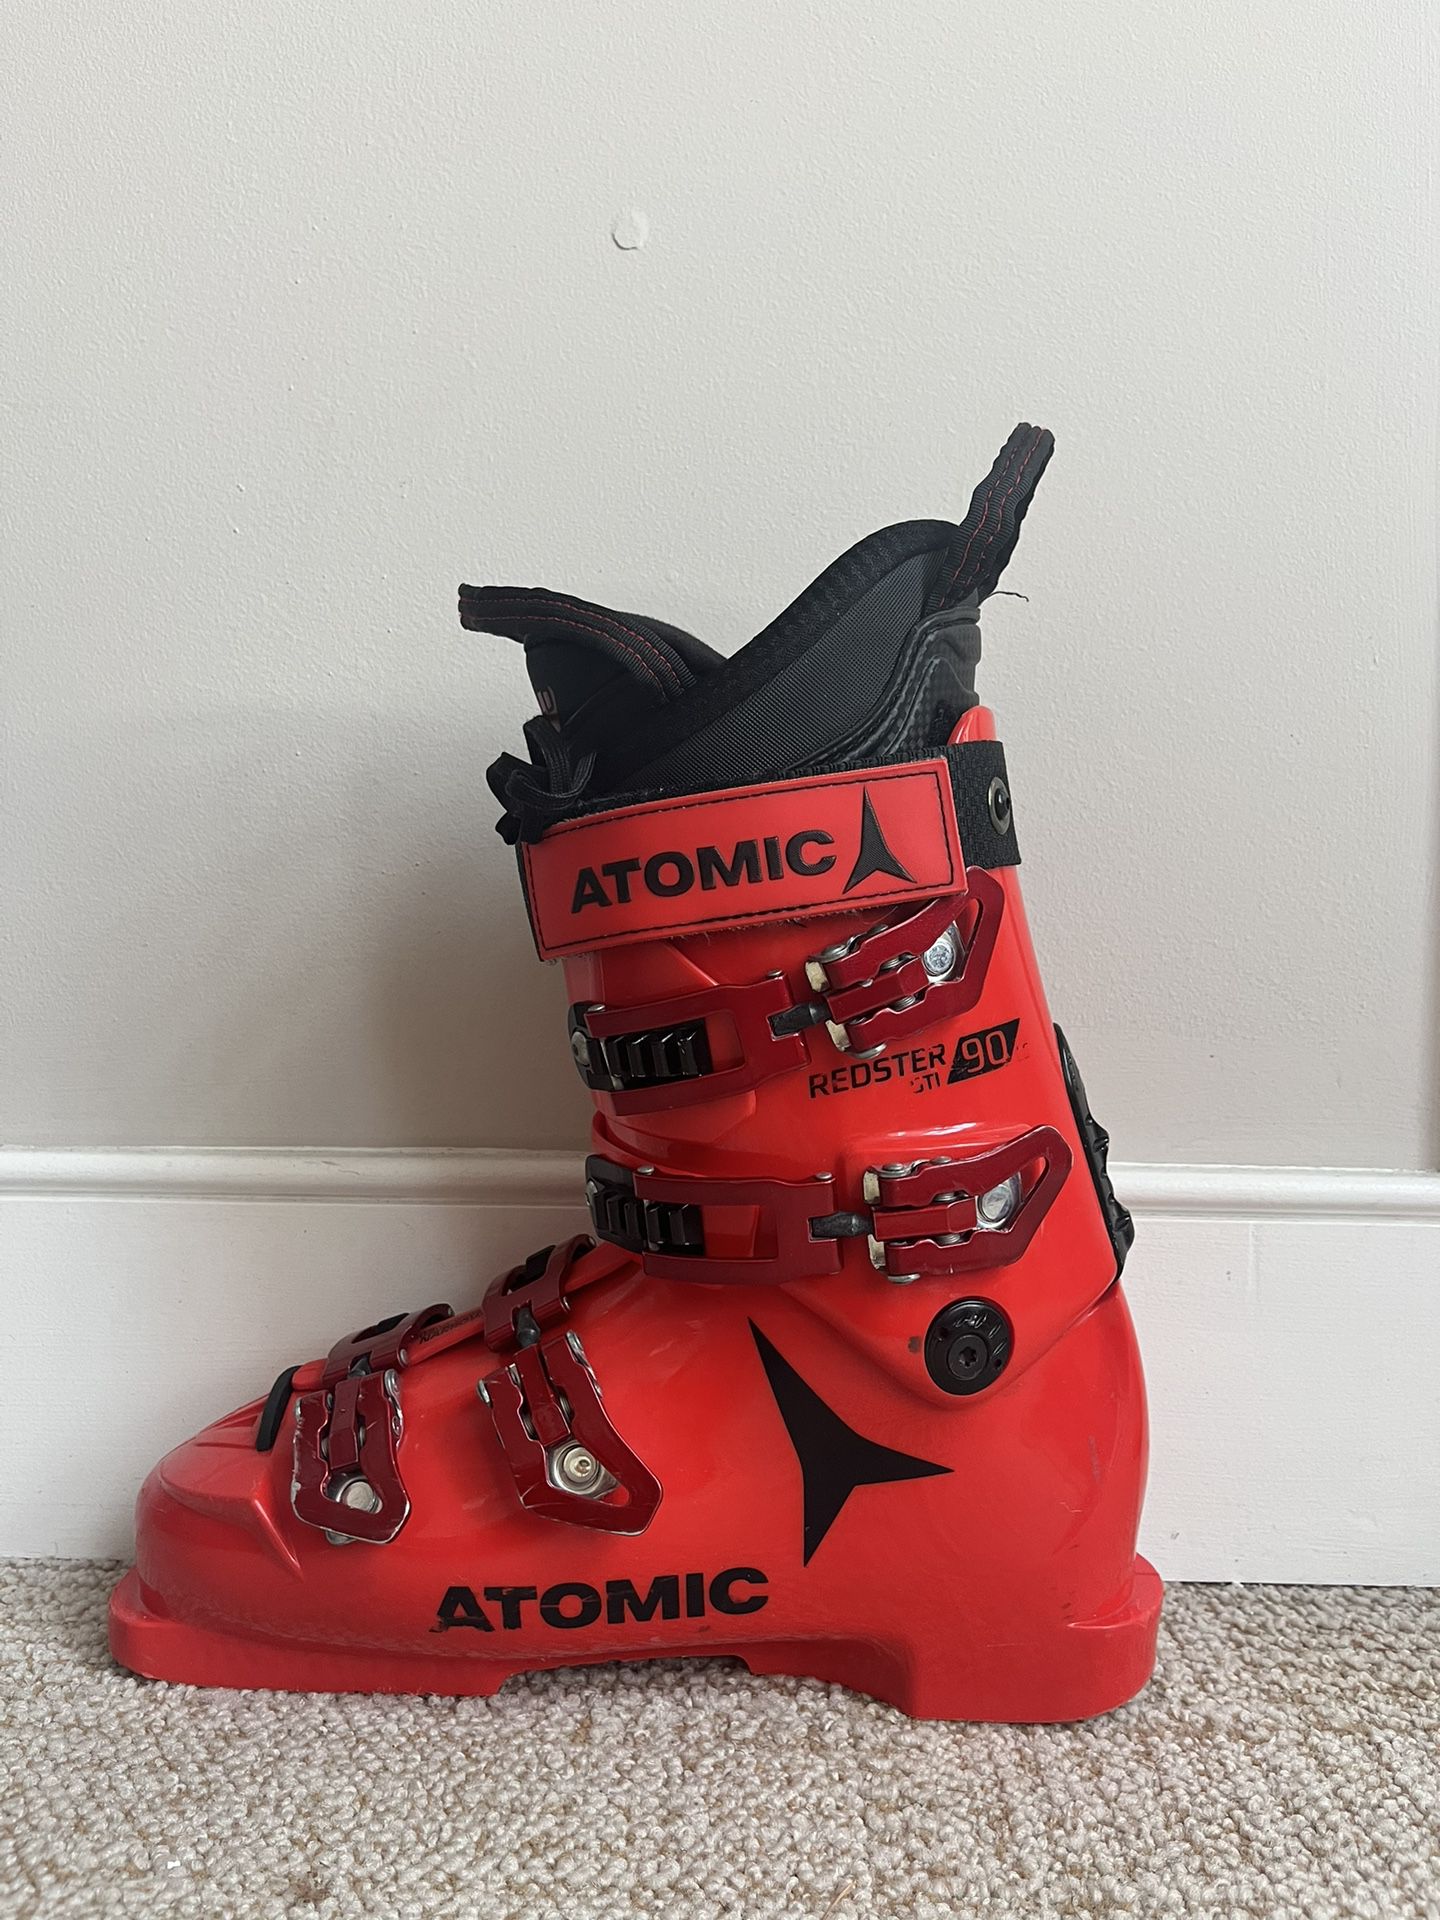 2022 Atomic Redster STI 90 LC 27/27.5 Ski Boot for Sale in Greenwich, CT -  OfferUp